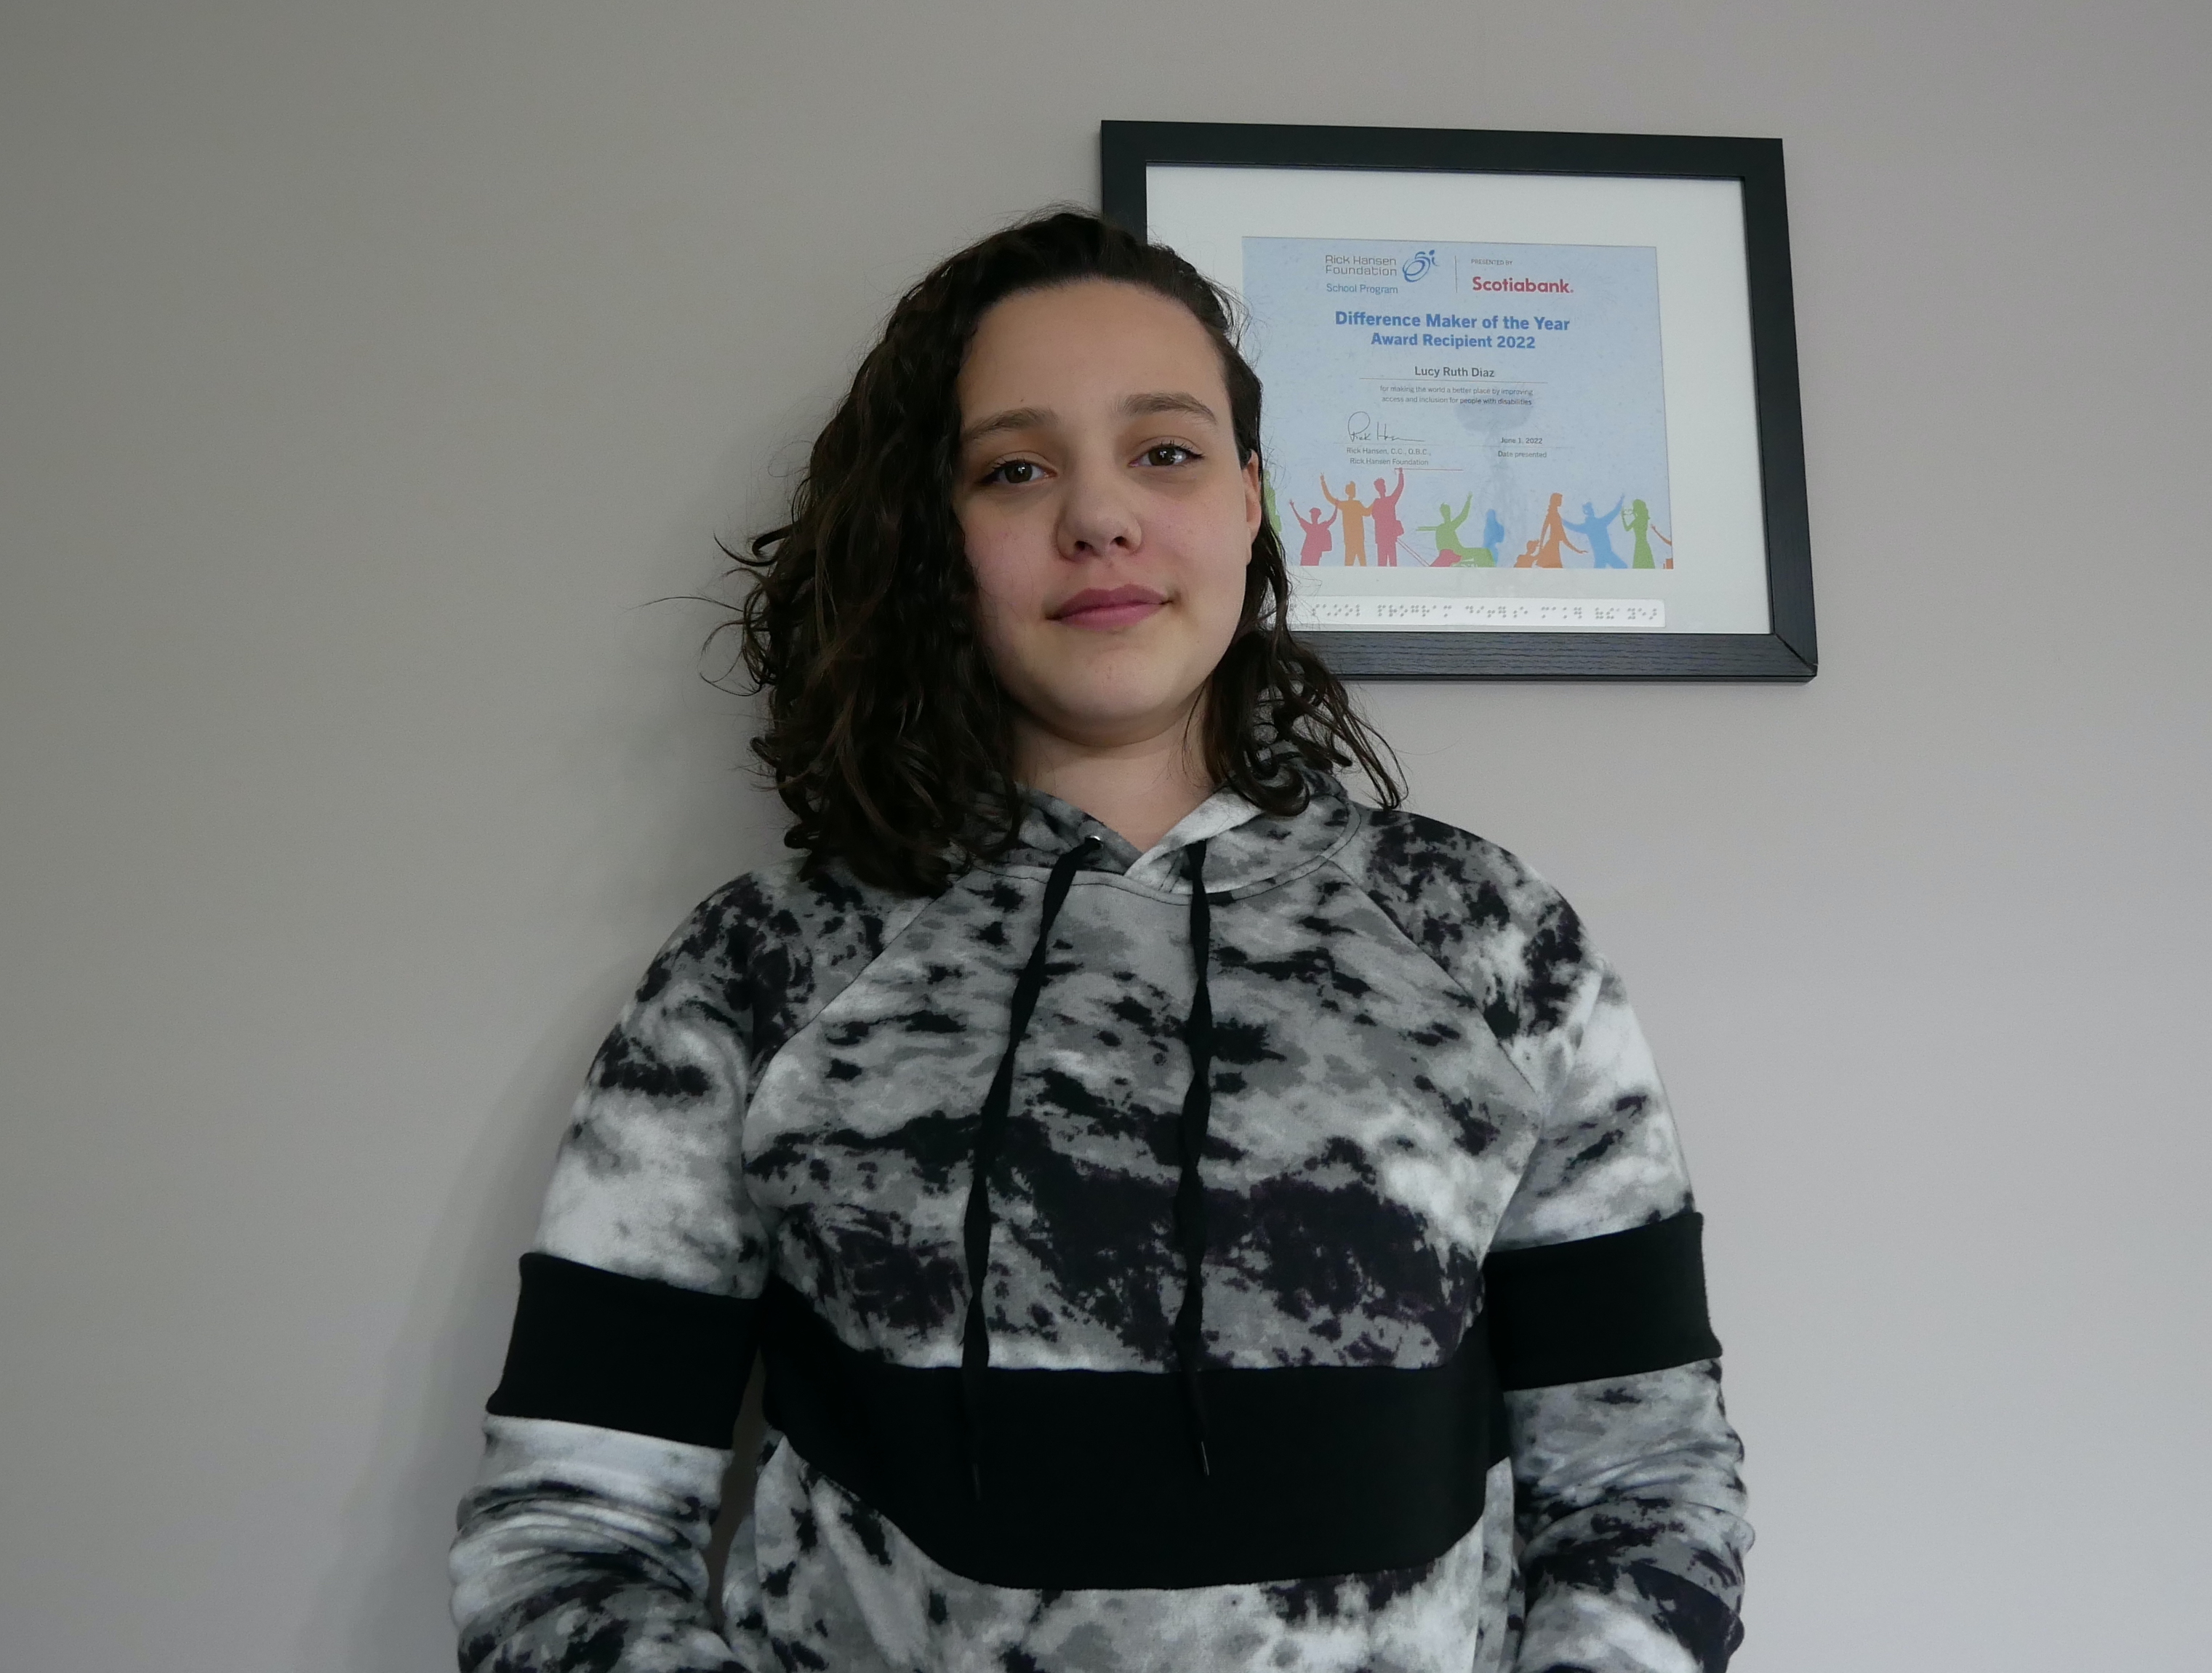 Young girl with light skin and shoulder length black curly hair. She is beside a framed Difference Maker certificate that is hanging on the wall. She is wearing a black and white tie-dye hoodie.